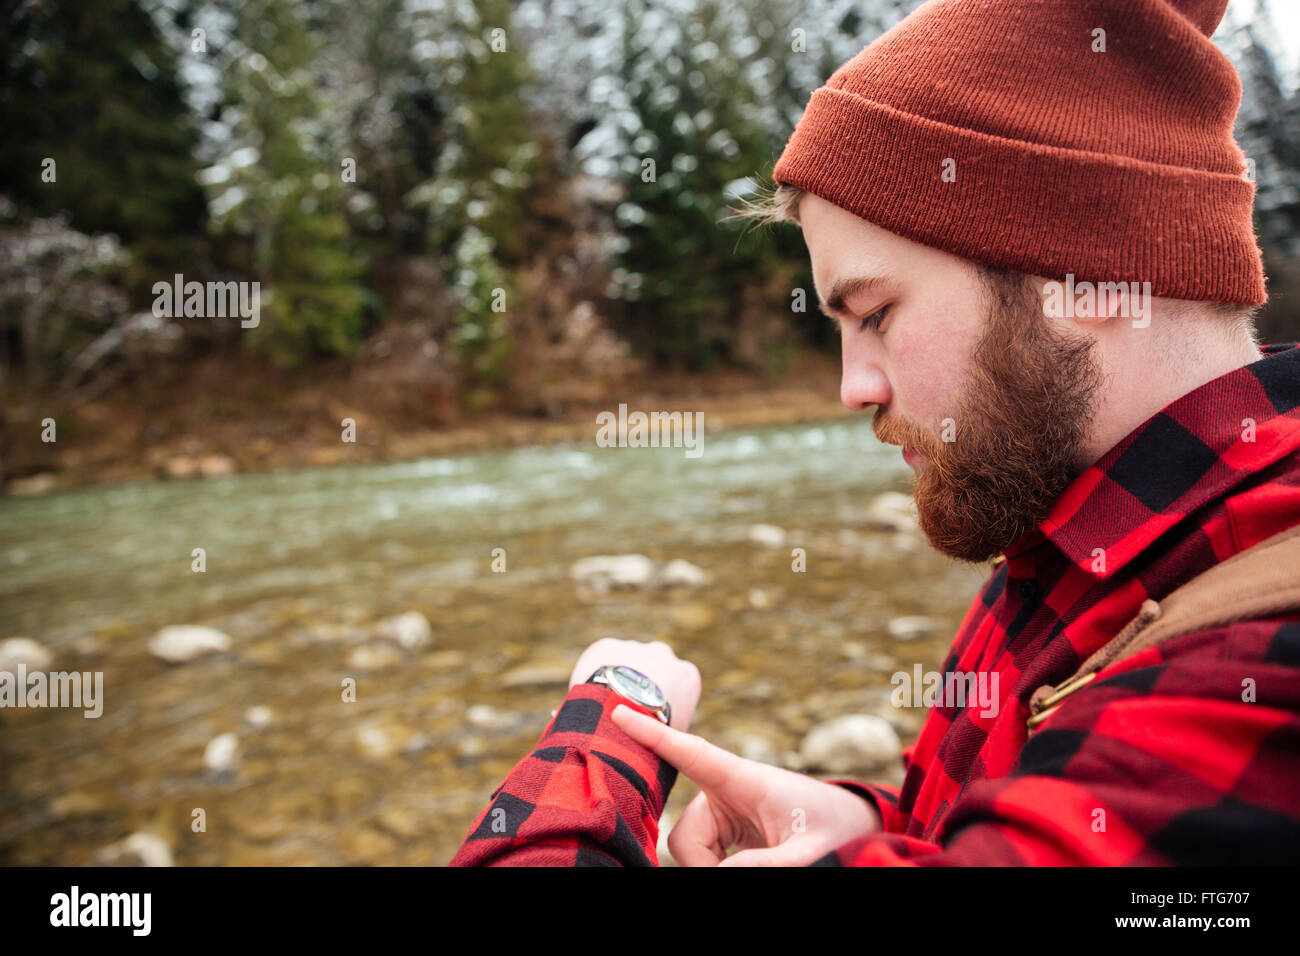 Man looking on the wrist watch outdoors with river on background Stock Photo